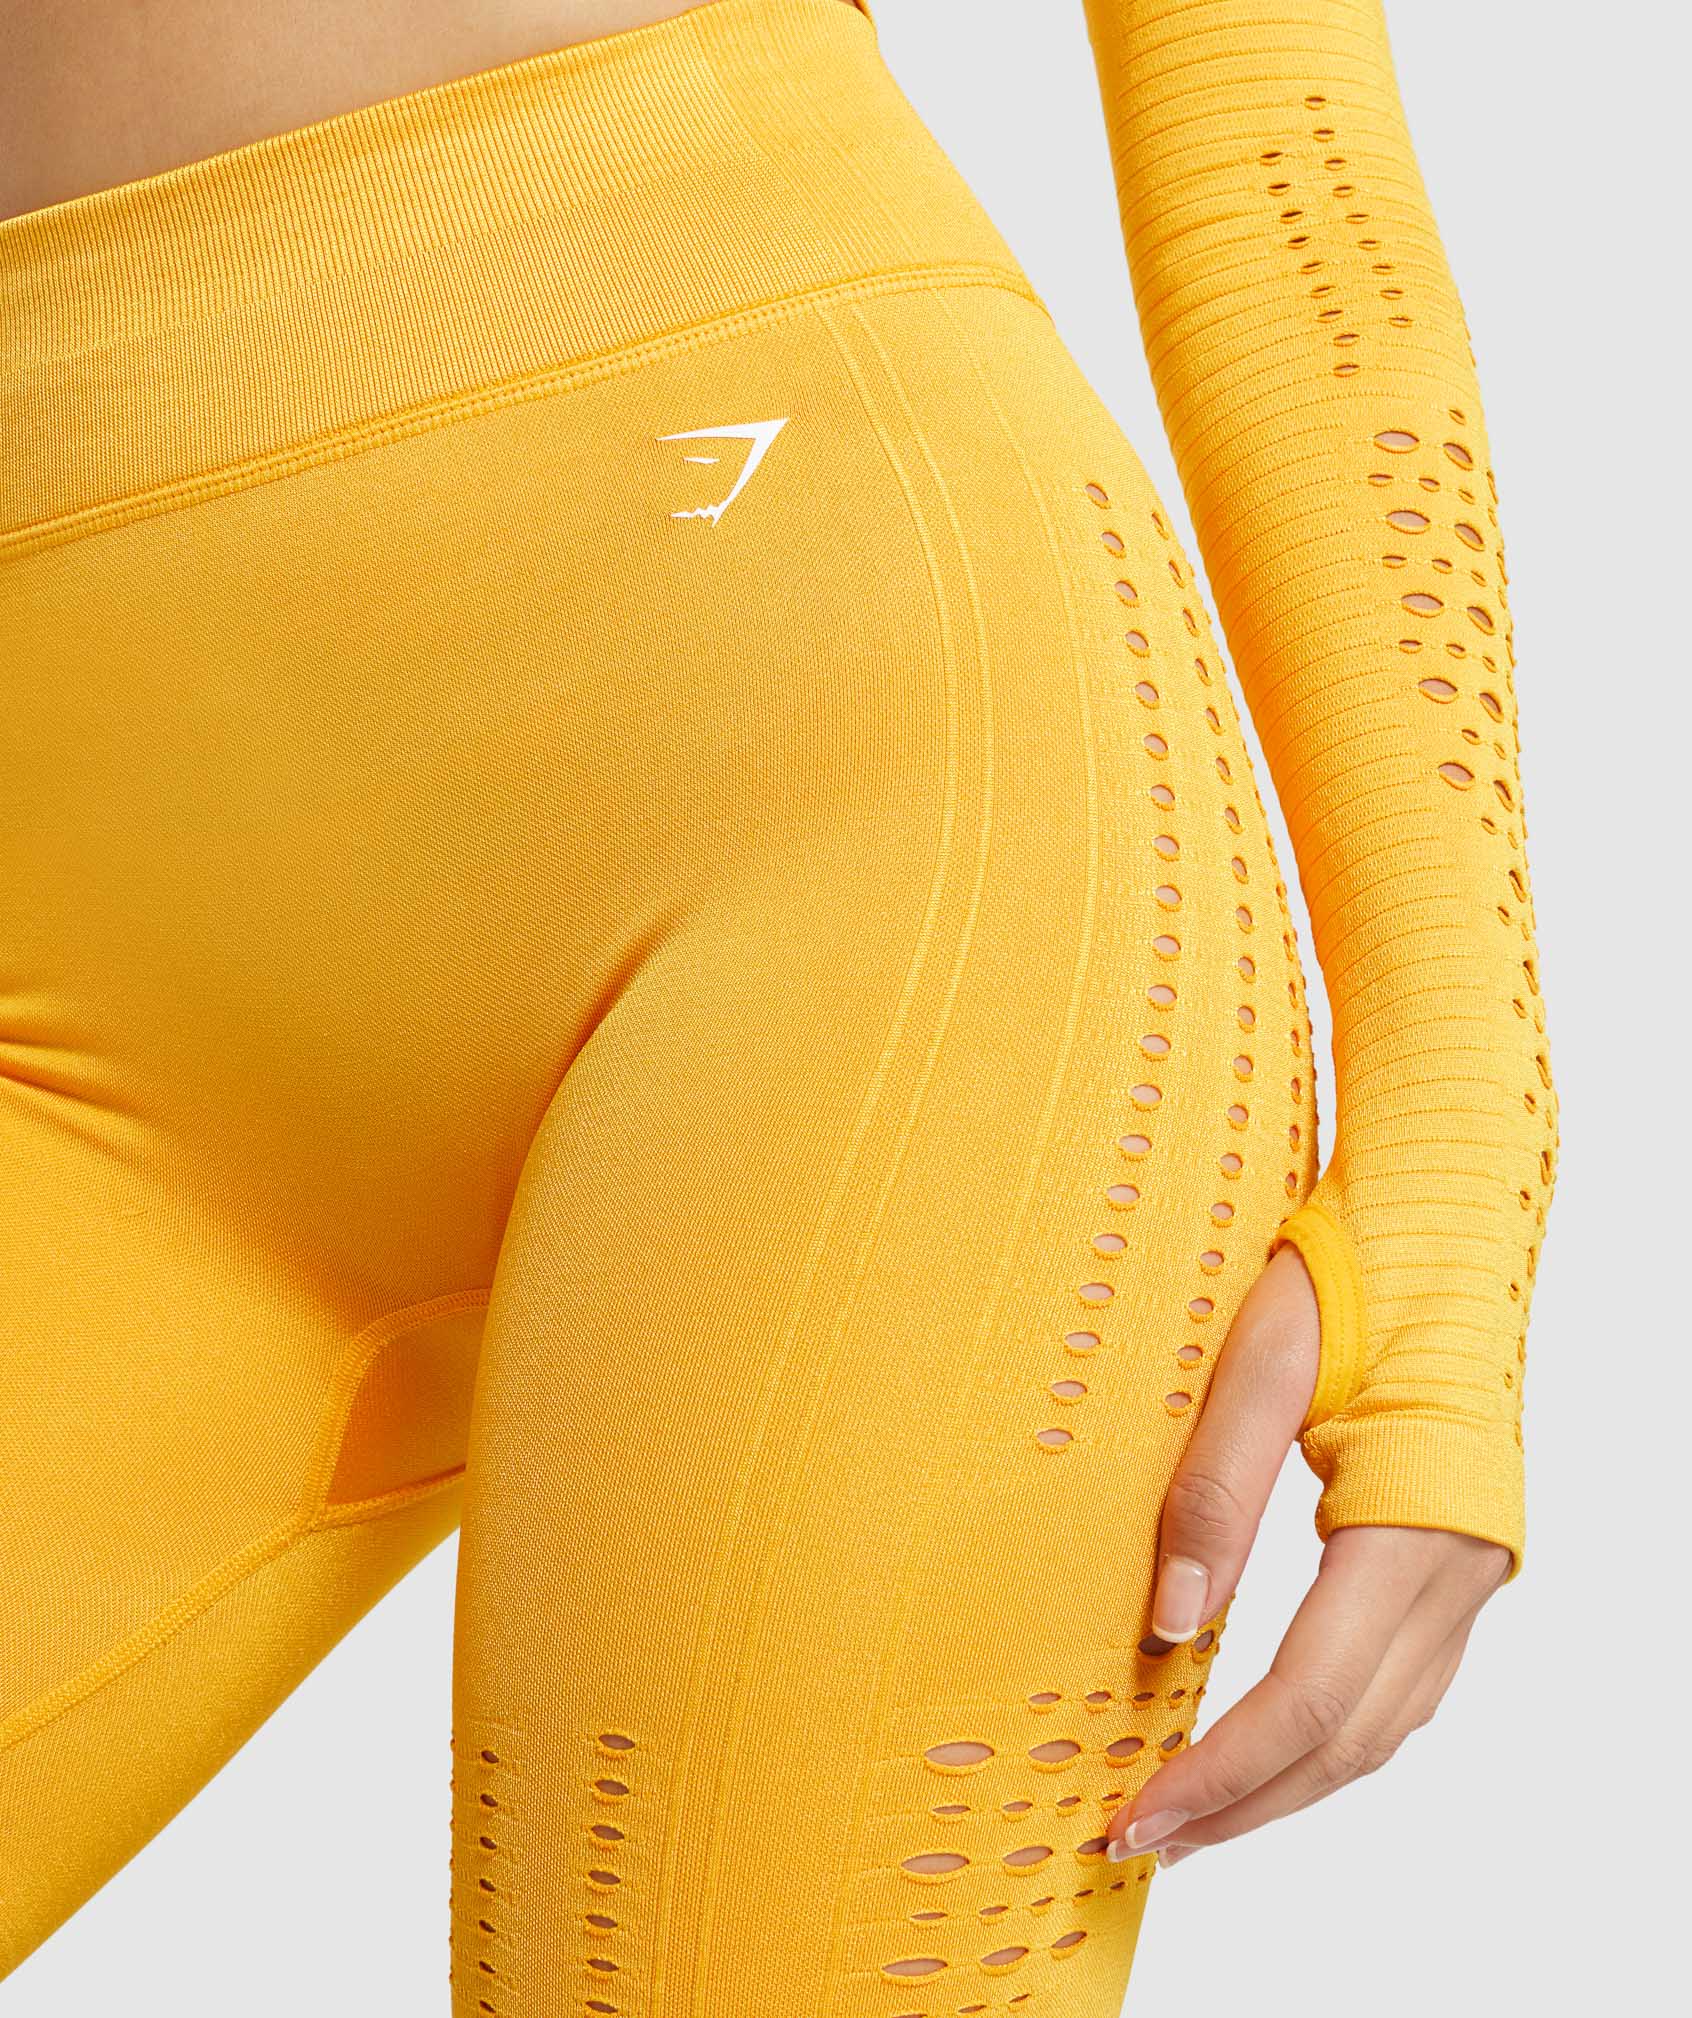 Gymshark Flawless Knit Yellow Glow Seamless Leggings Size M Excellent Con